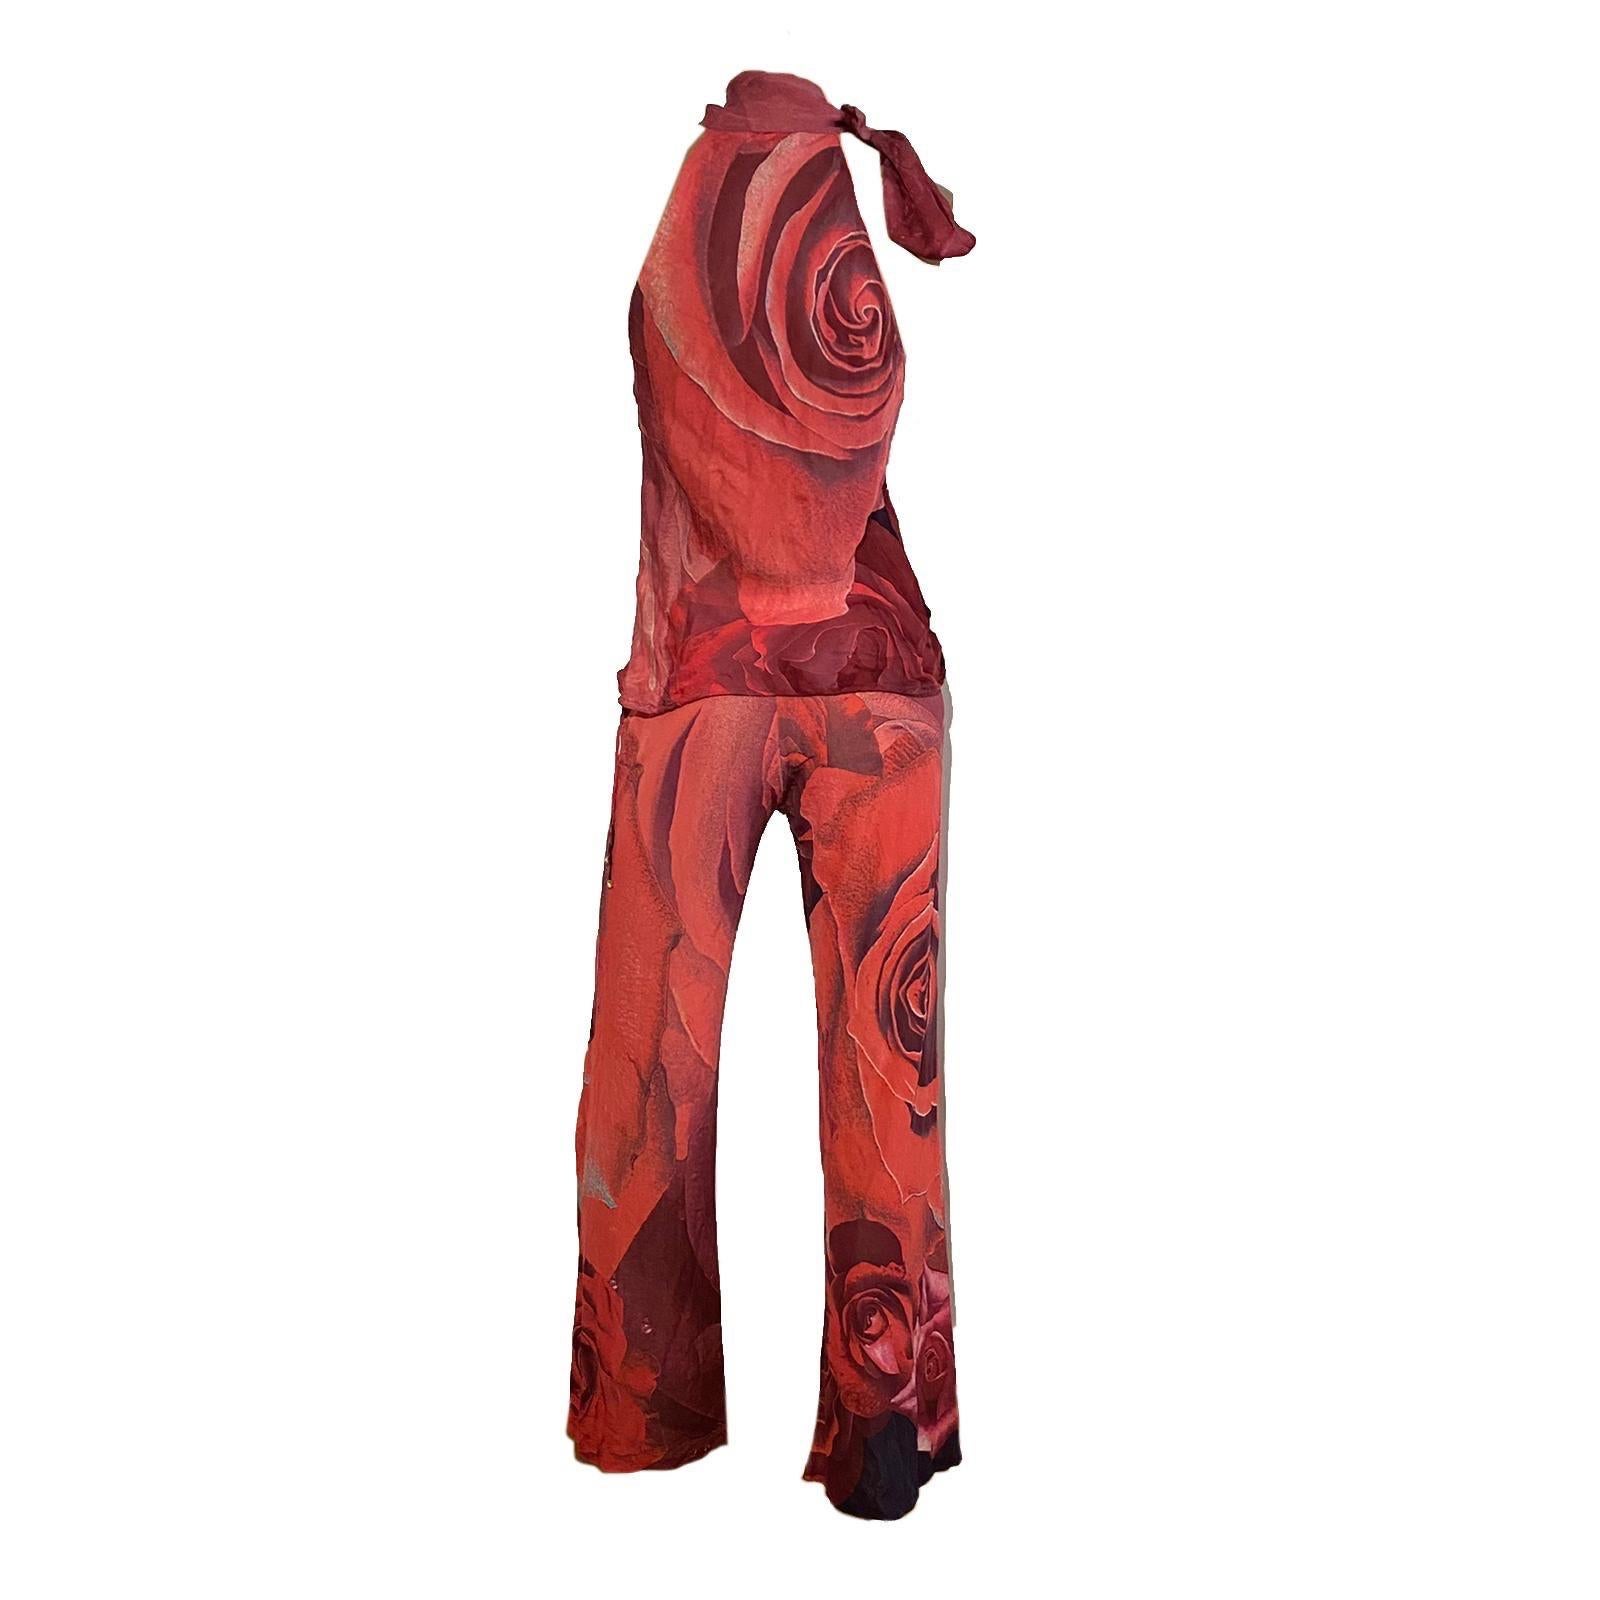 Roberto Cavalli Two-piece Set Ensemble (Turtleneck Sleeveless Top + Matching Flared Pants) with Allover Red Roses floral print from the Spring/Summer 2000 collection.

Size S

PANTS
Waistline: 70 cm/ 27,5 inch
Outseam: 98 cm/ 38,5 inch
Inseam: 76